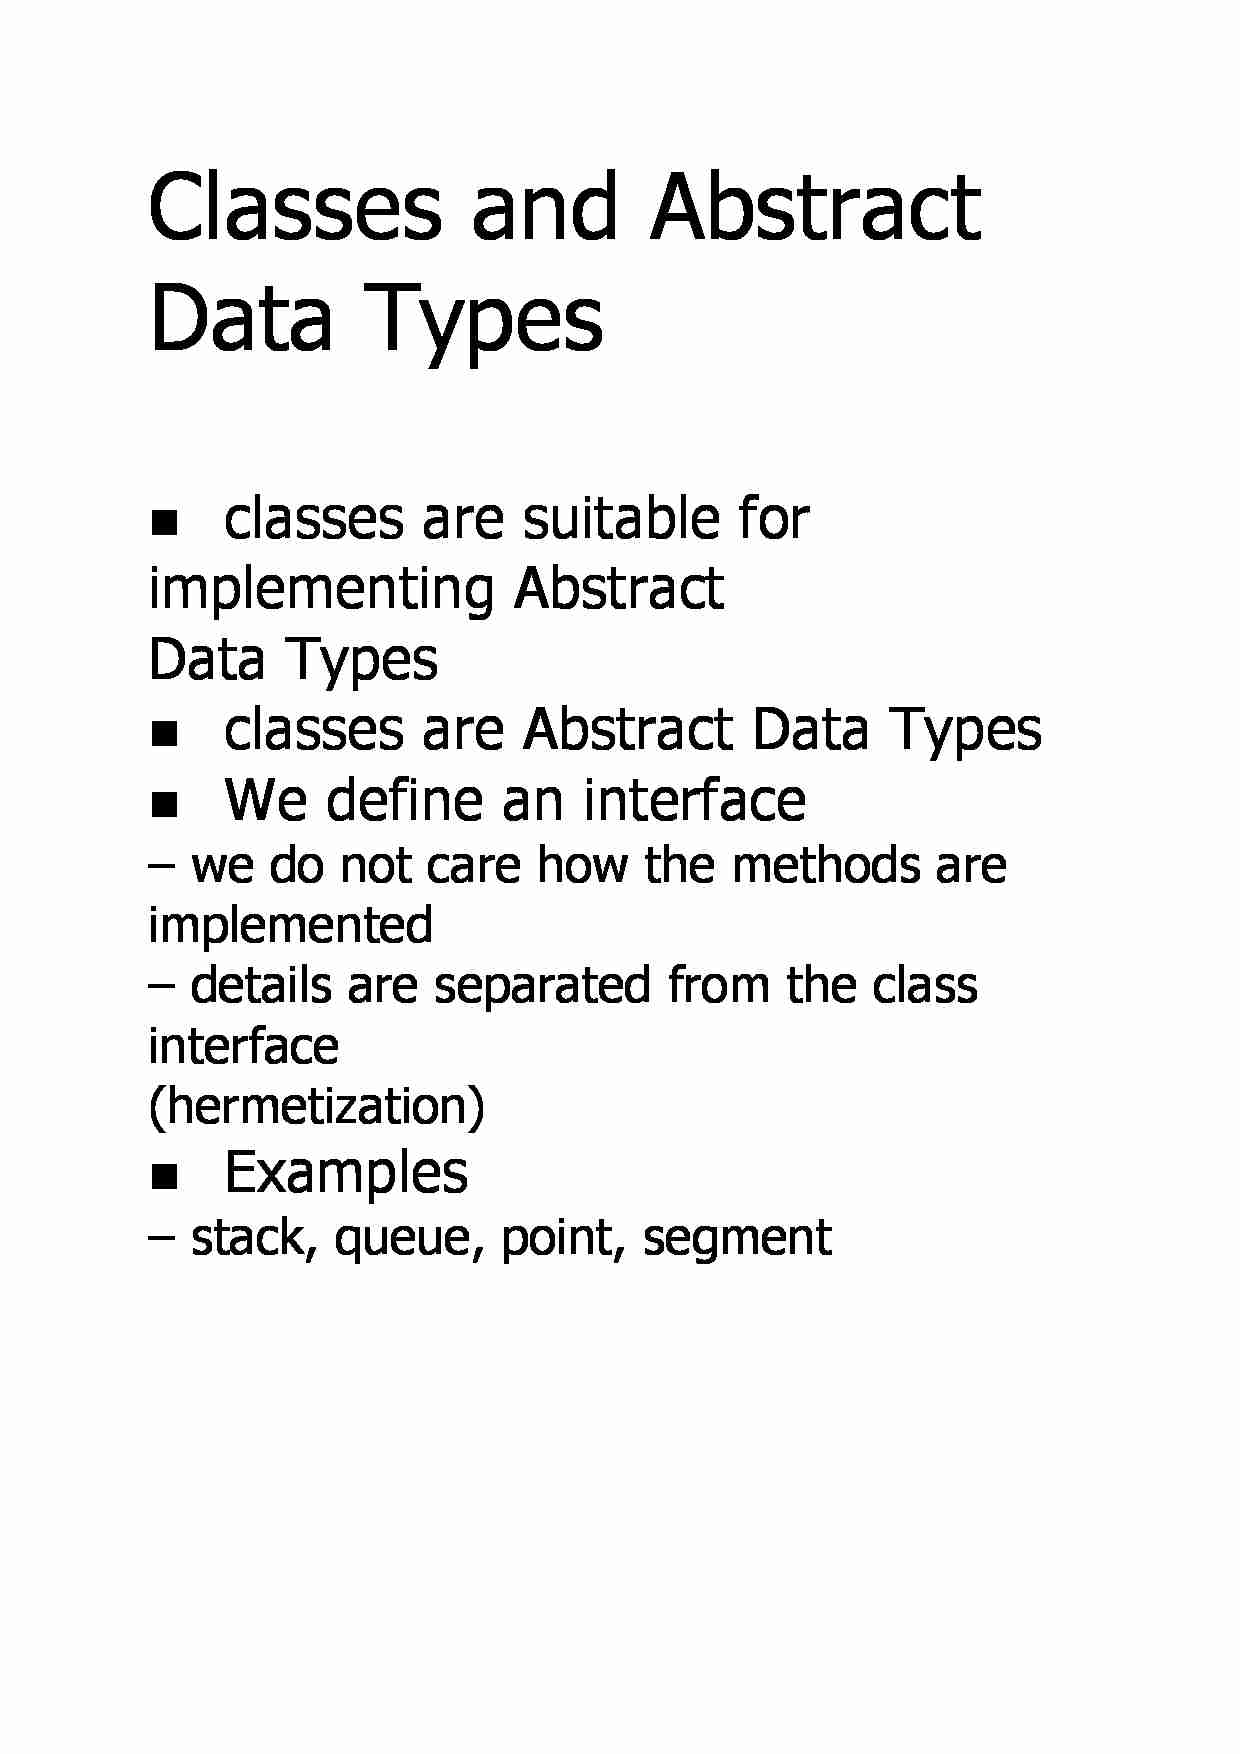 Classes and Abstract Data Types - strona 1